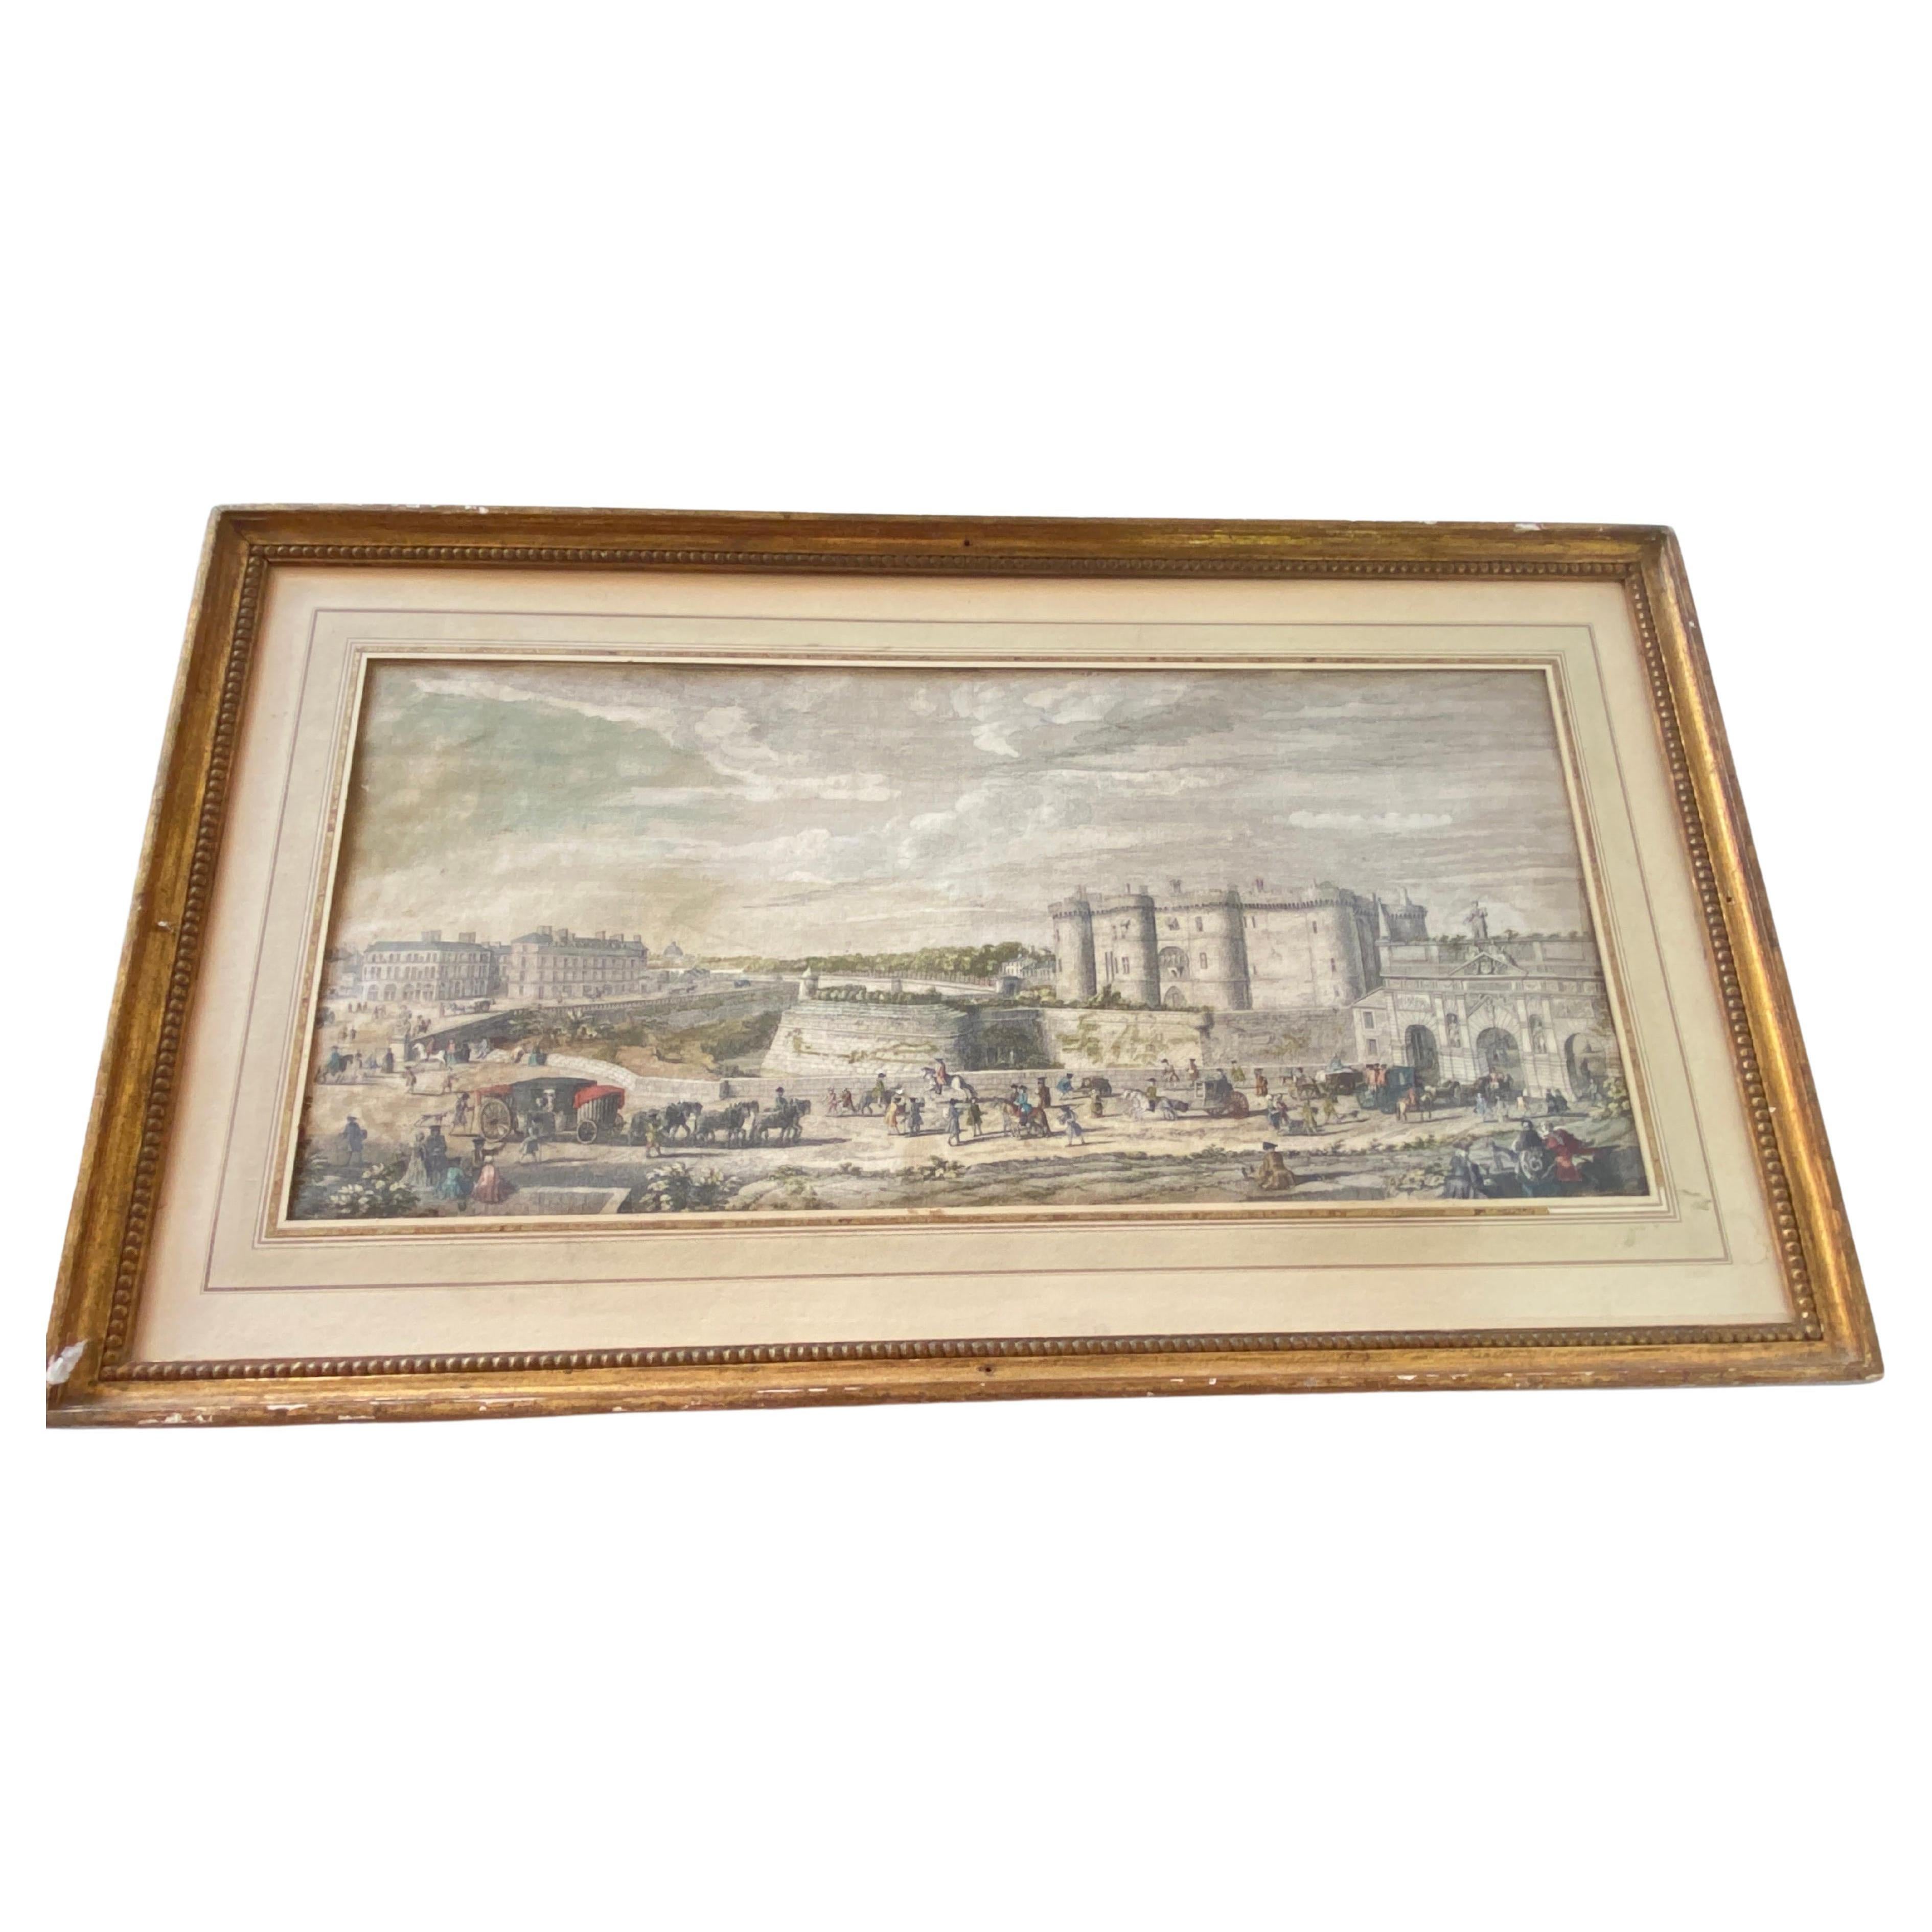 This is an engraving, in colors. With a large frame in wood. Representing an architectural place in paris. It has been made in France in the 18th Century.
The engraving has no glass on it.